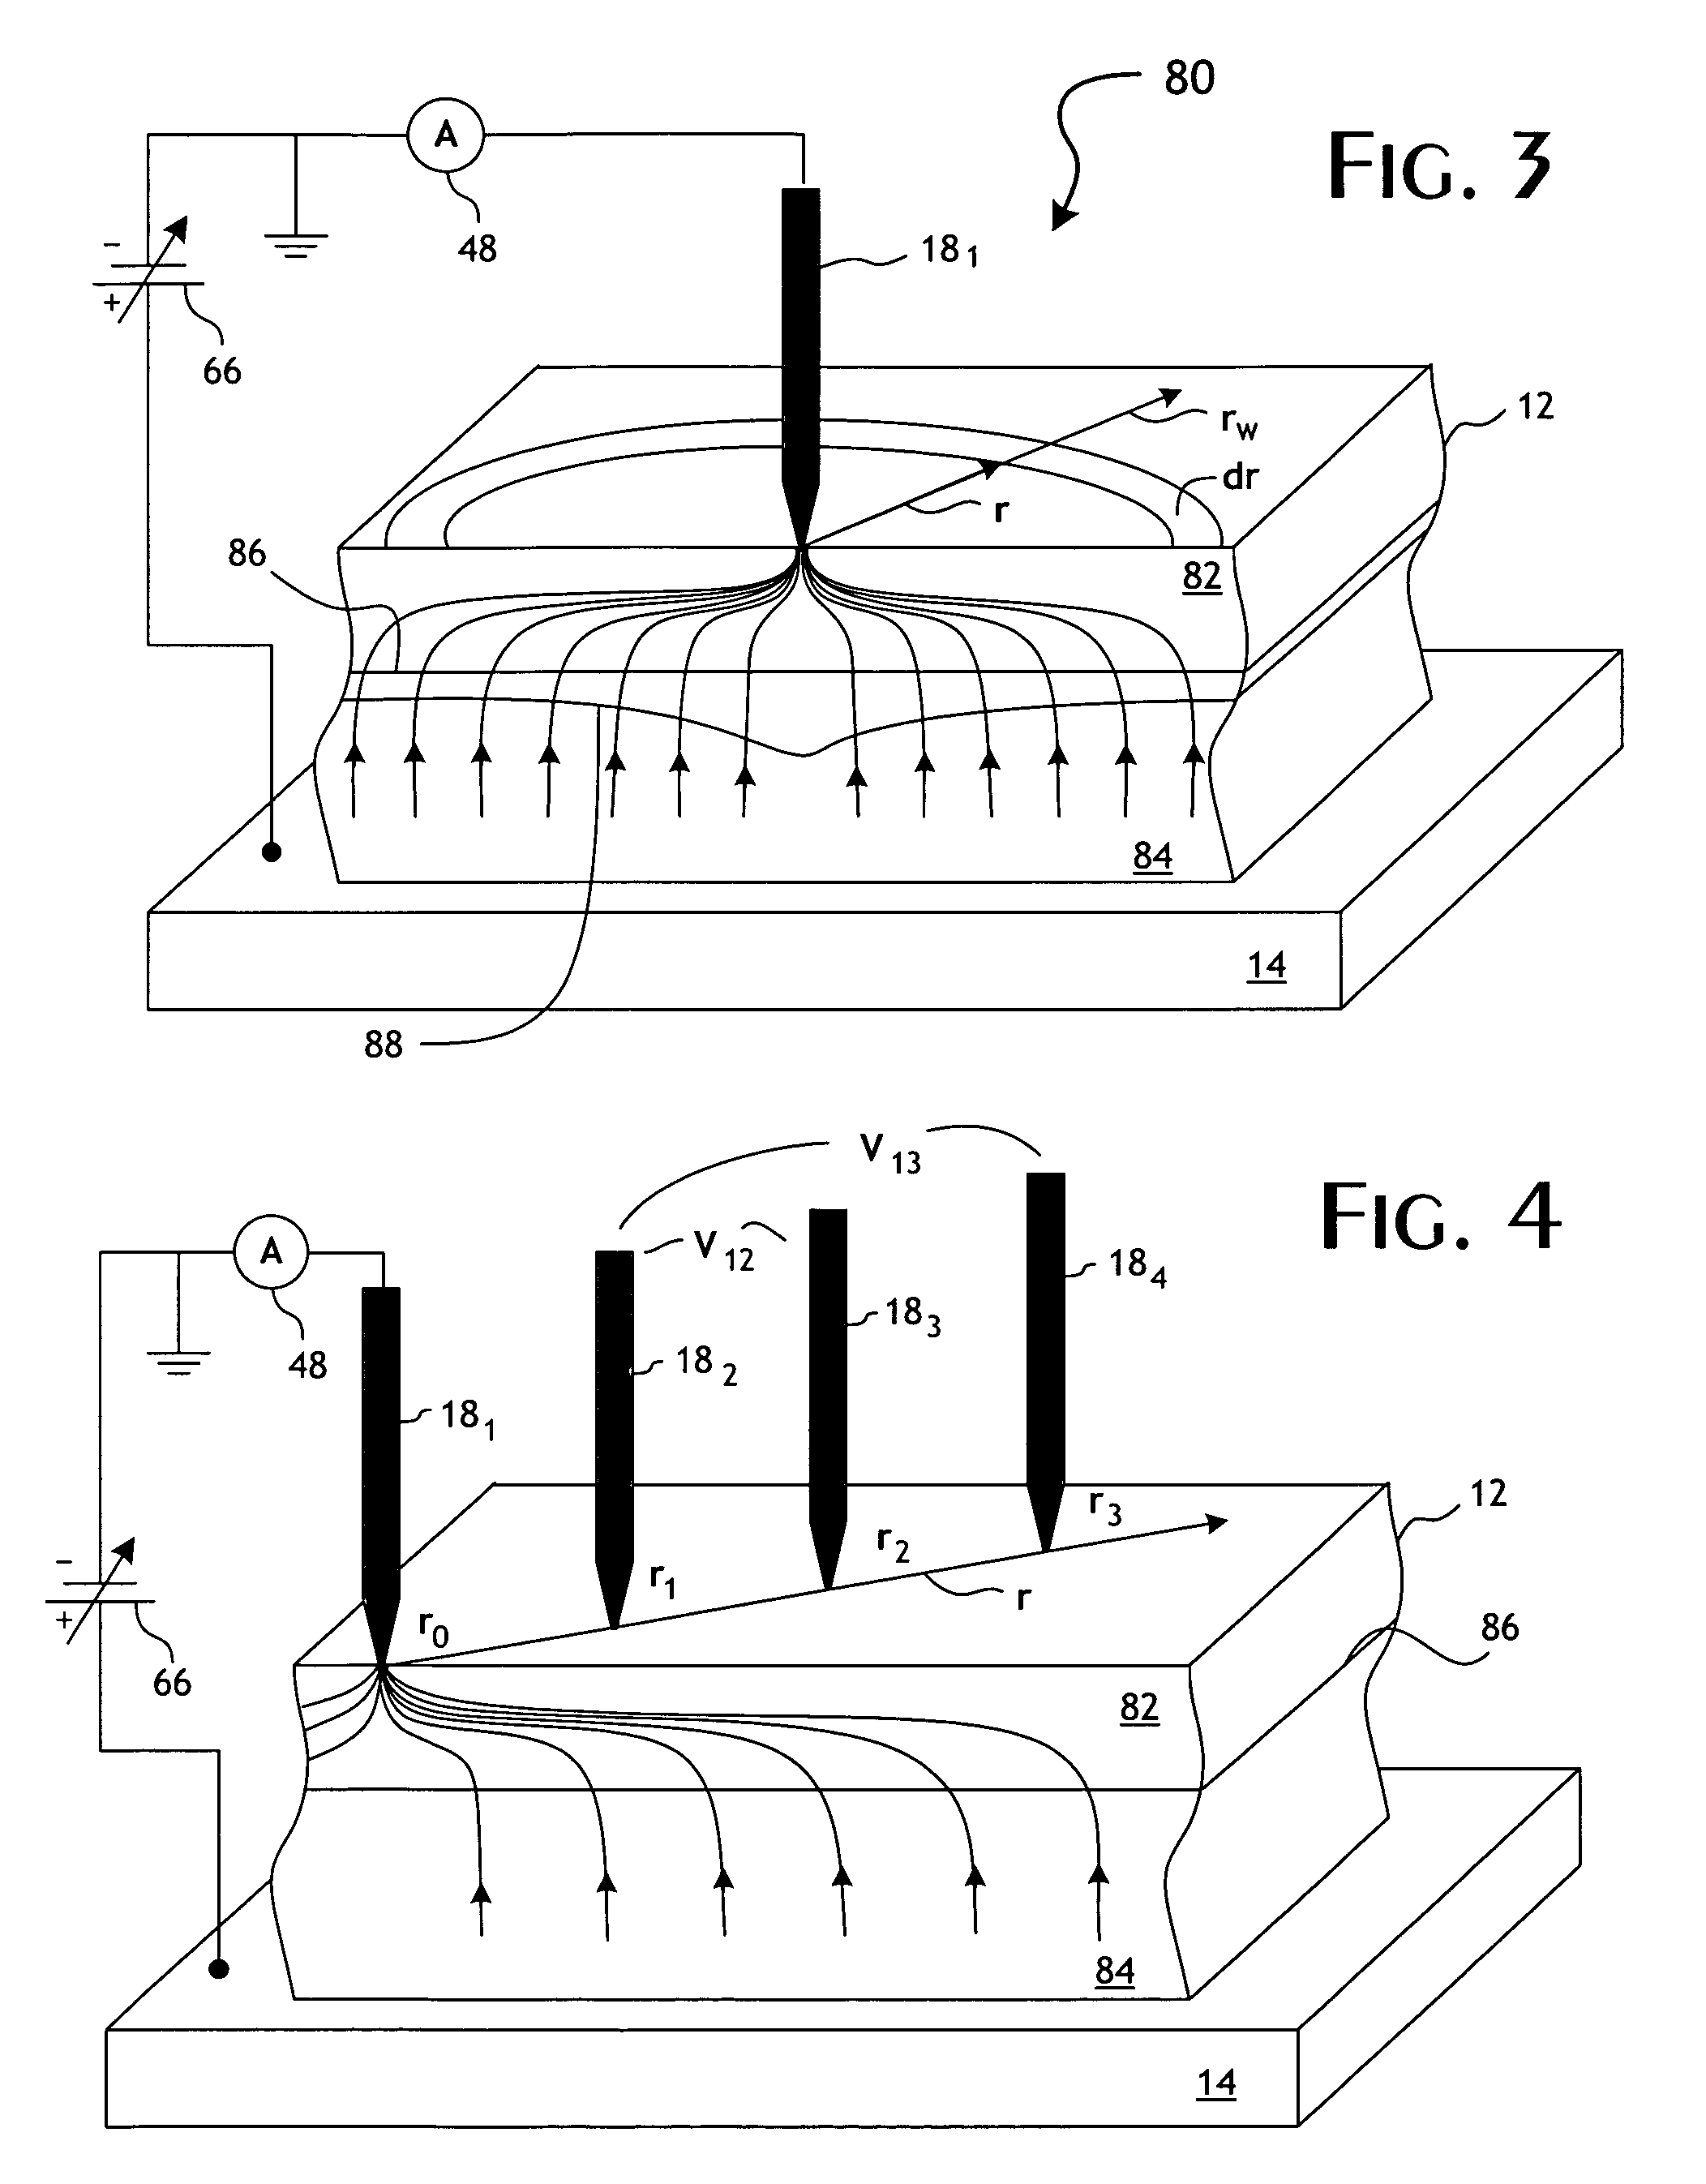 System and methods of measuring semiconductor sheet resistivity and junction leakage current